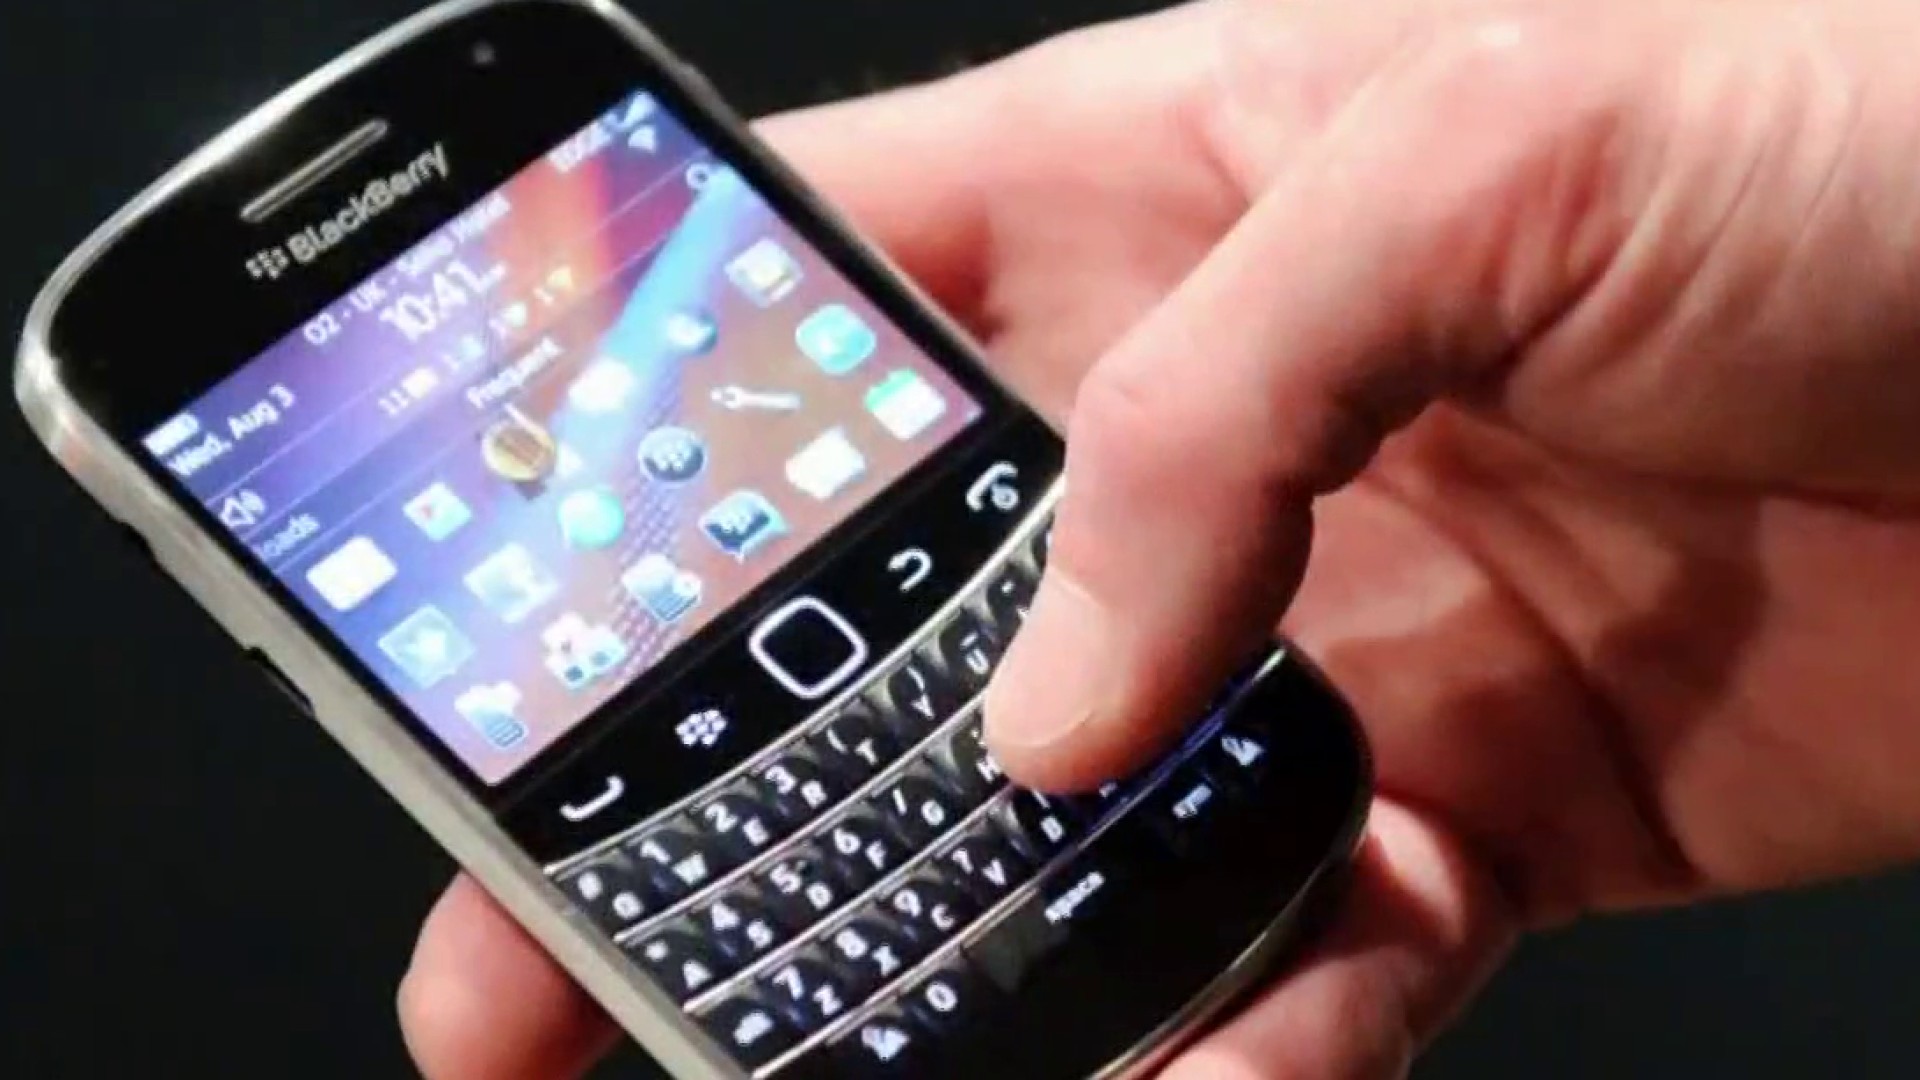 Why Blackberry is discontinuing service for classic devices